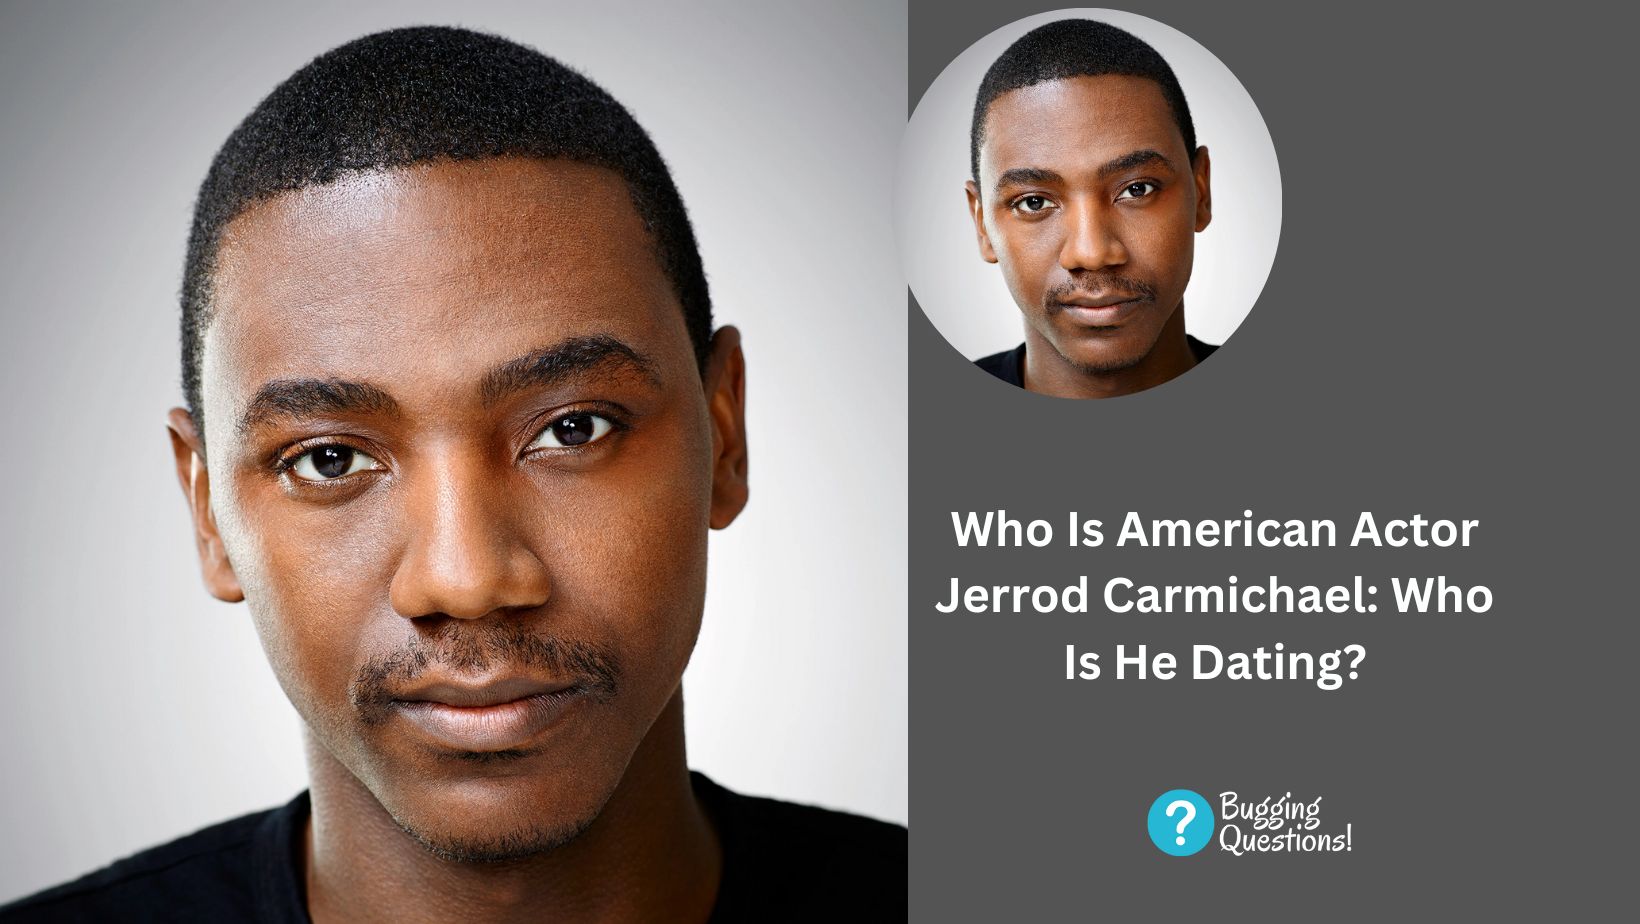 Who Is American Actor Jerrod Carmichael: Who Is He Dating?